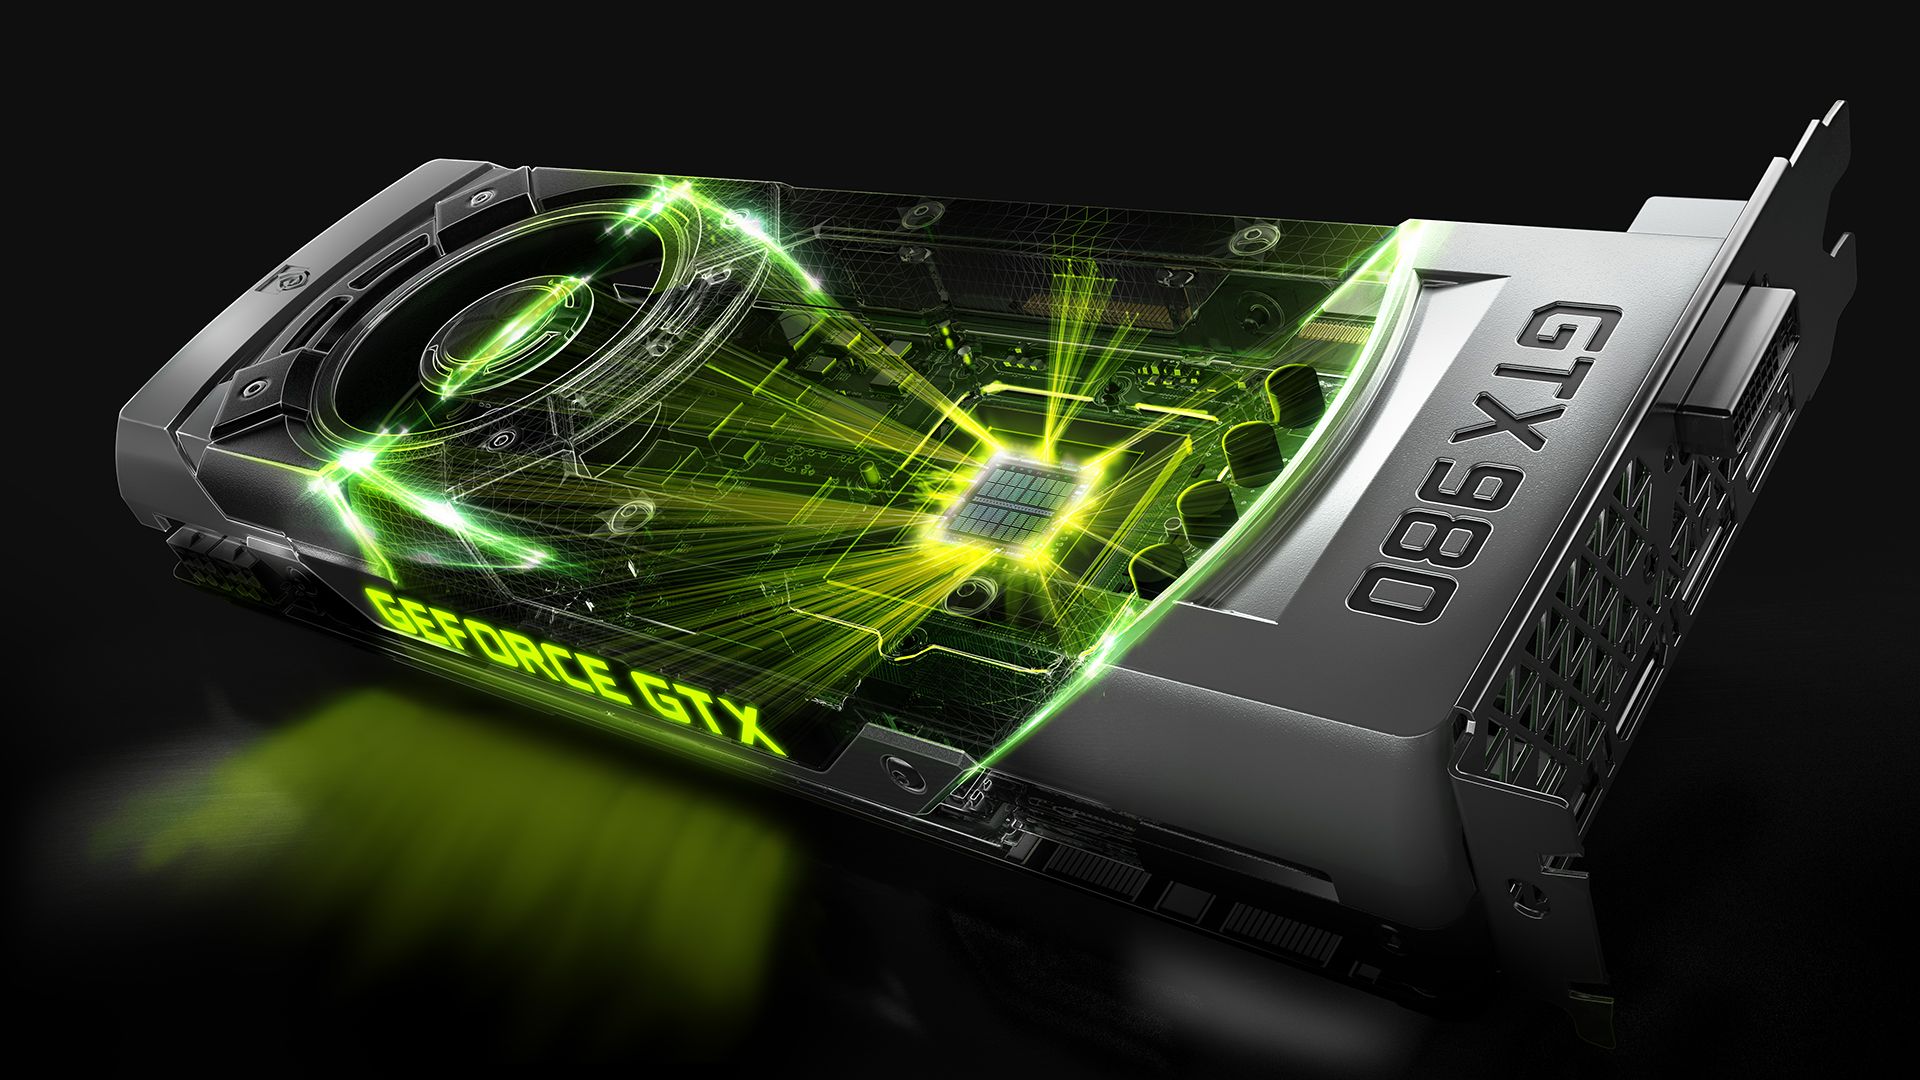 Nvidia and other GPU Designers are already working on 8K resolution